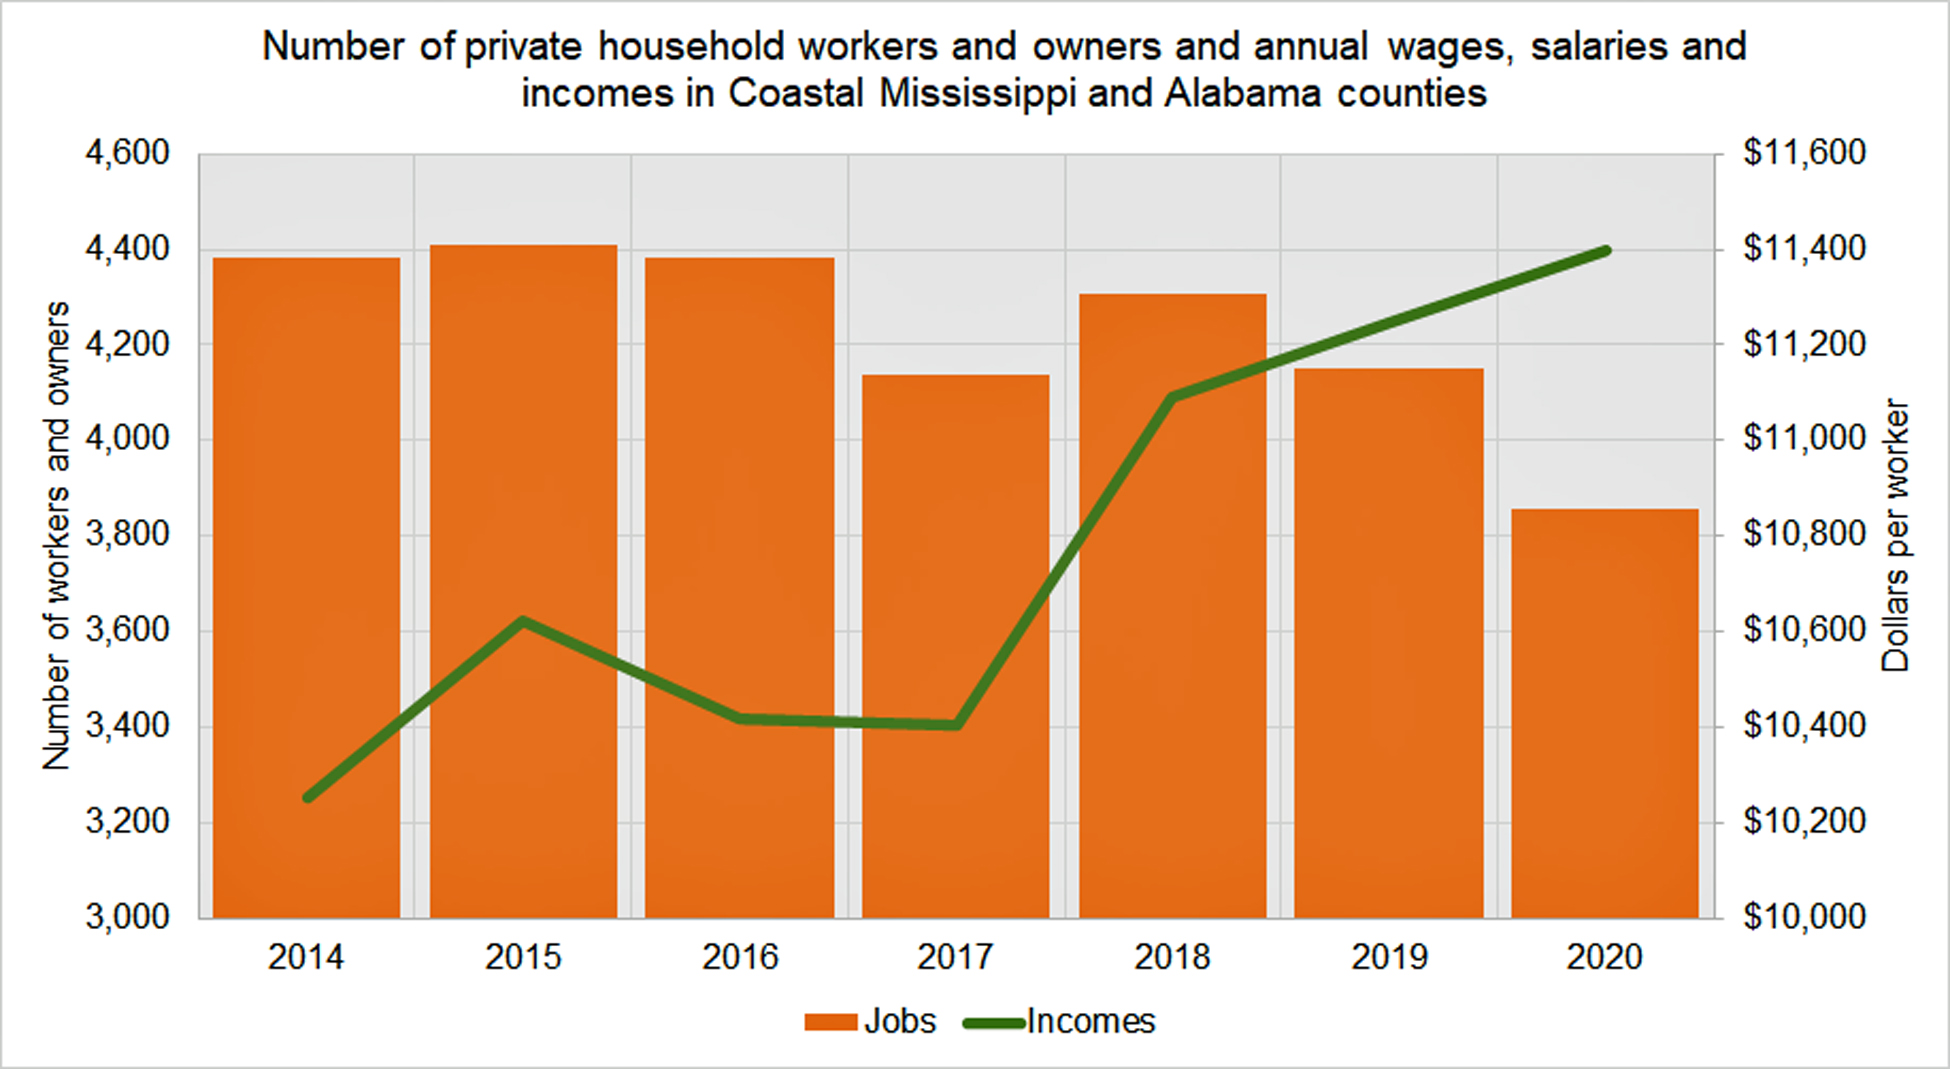 number_of_workers_and_owners_of_private_households_in_coastal_ms_and_al.jpg